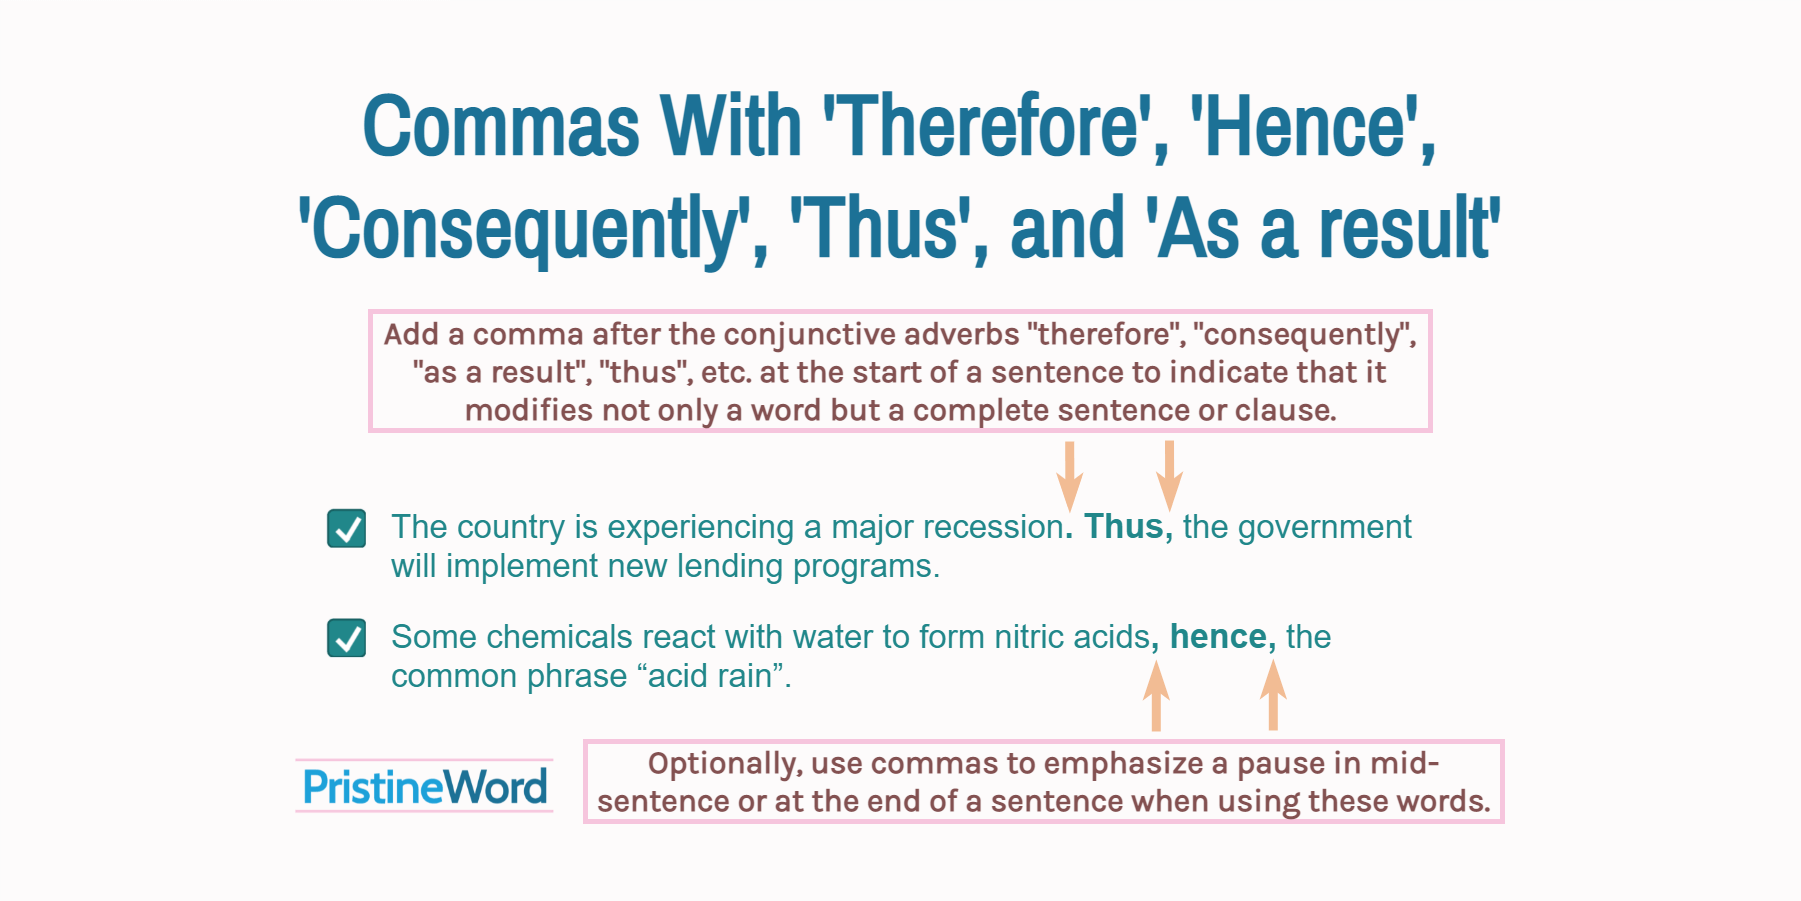 Commas With 'Therefore', 'Hence', 'Consequently', 'Thus', and 'As a result'